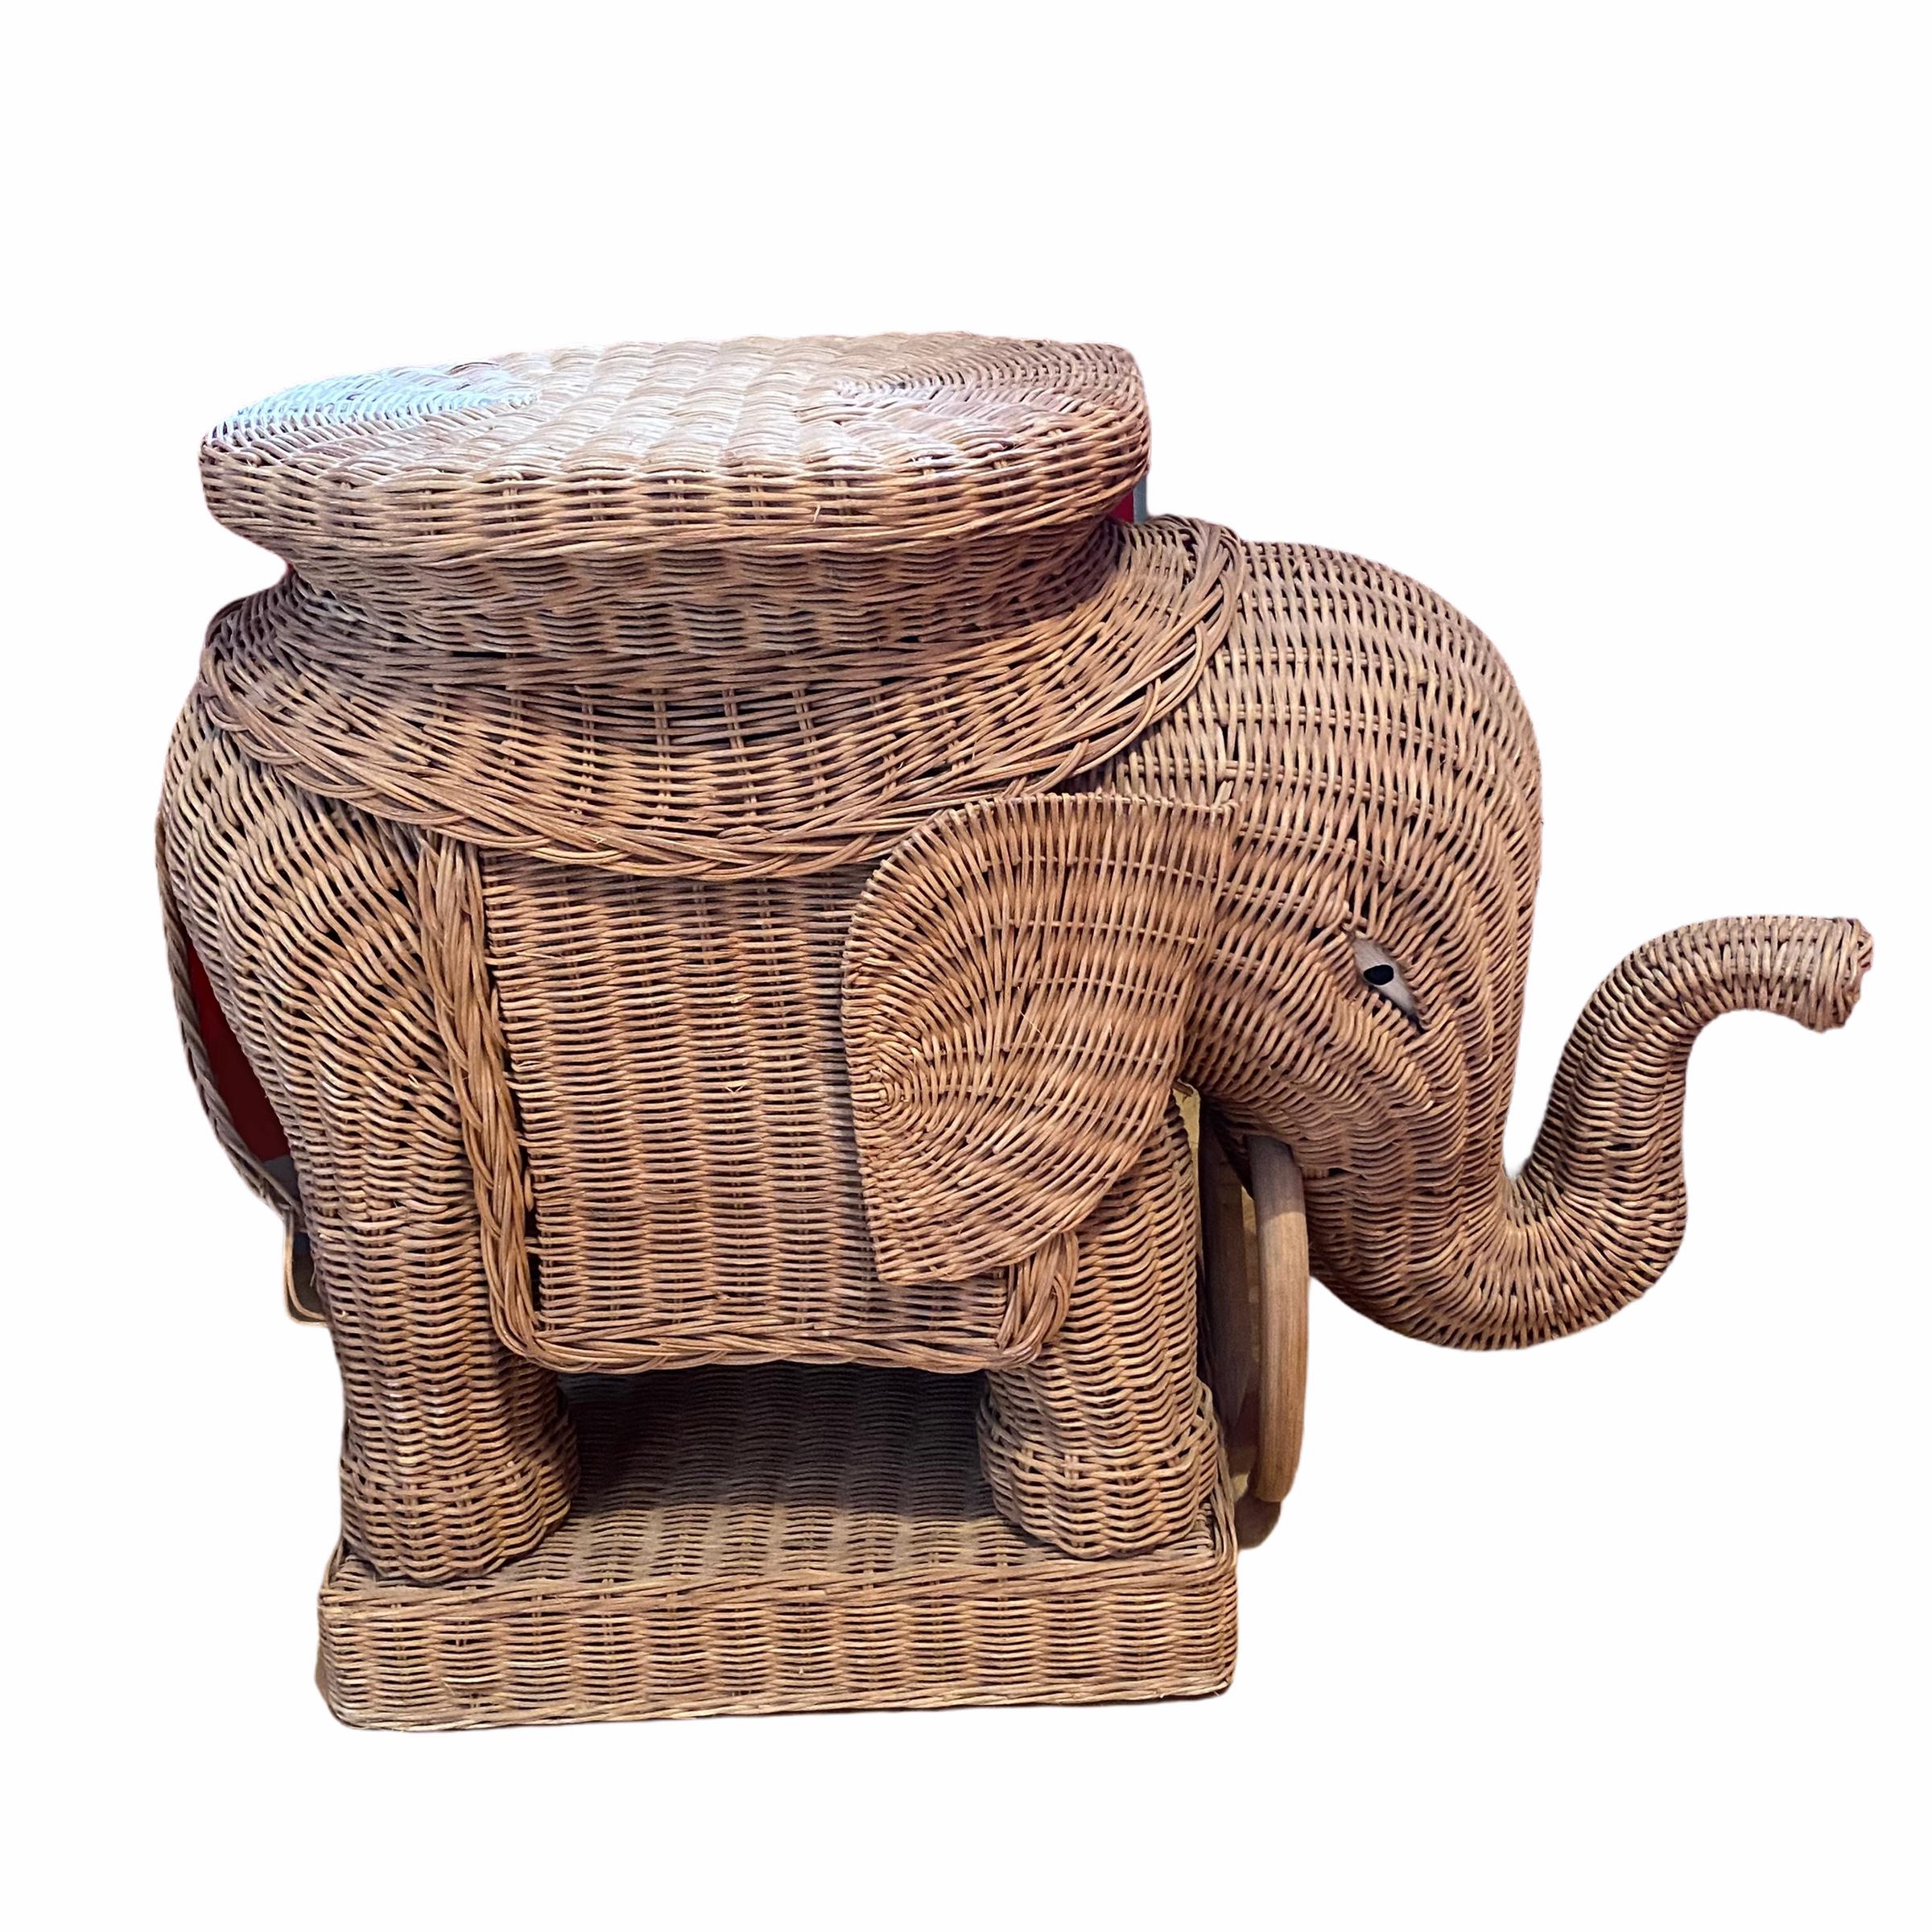 Mid-20th century eye-catching elephant-shaped end table or side table, constructed in hand-braided rattan accented with wood tusks. Nice addition to your home, patio or garden. This is in used condition, with signs of wear as expected with age and